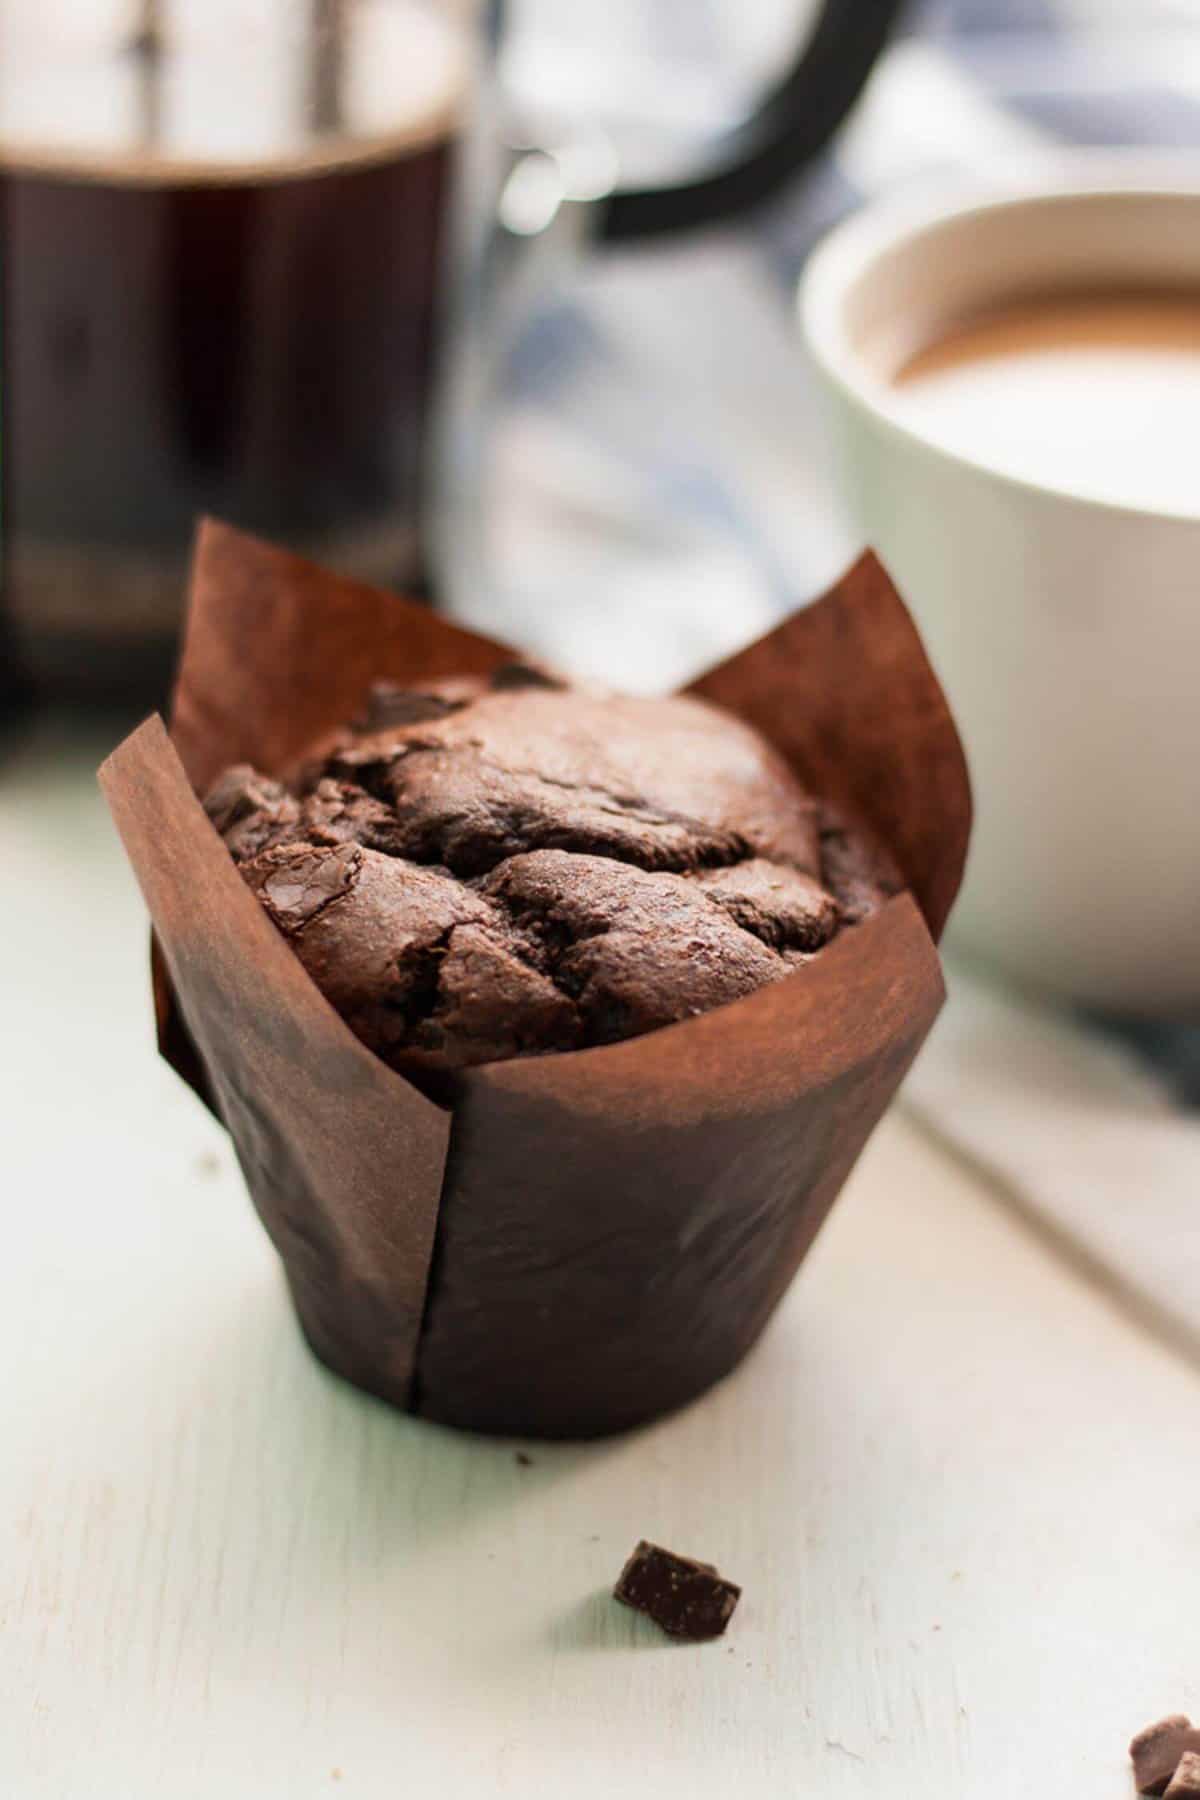 Double Chocolate Sweet Potato Muffins - these easy to make muffins are a chocolatey indulgence and are super moist thanks to the addition of mashed sweet potato! You have to try them! | eatloveeats.com